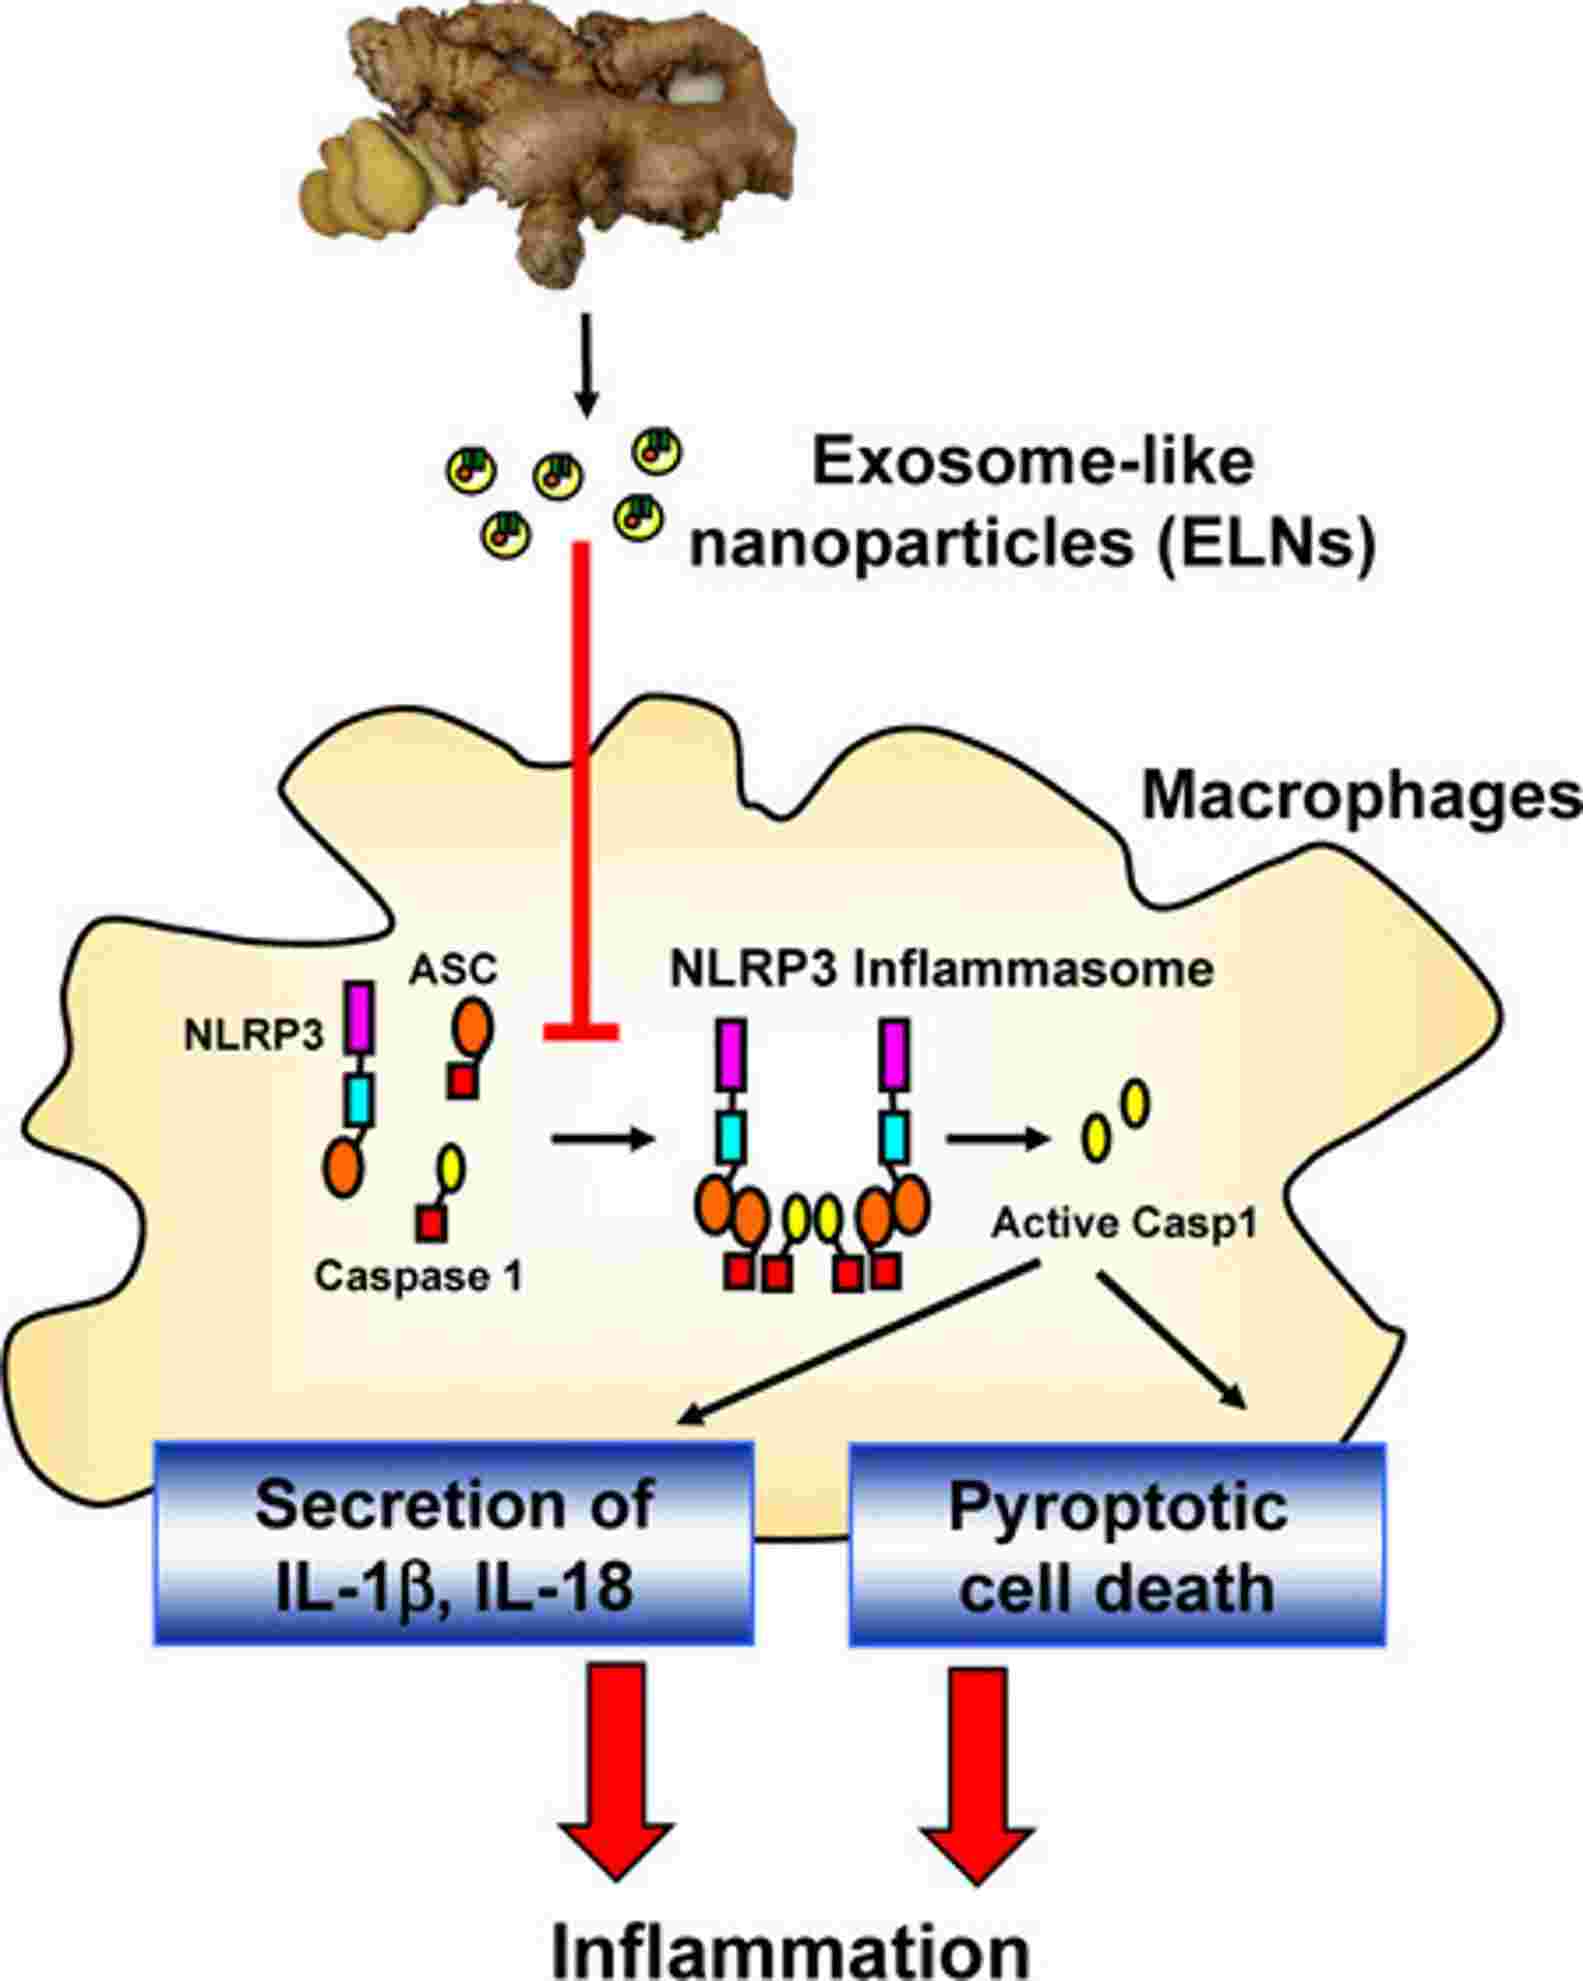 Ginger root exosomes prevent NLRP3 inflammatory vesicles from becoming activated. (Chen, et al., 2019)